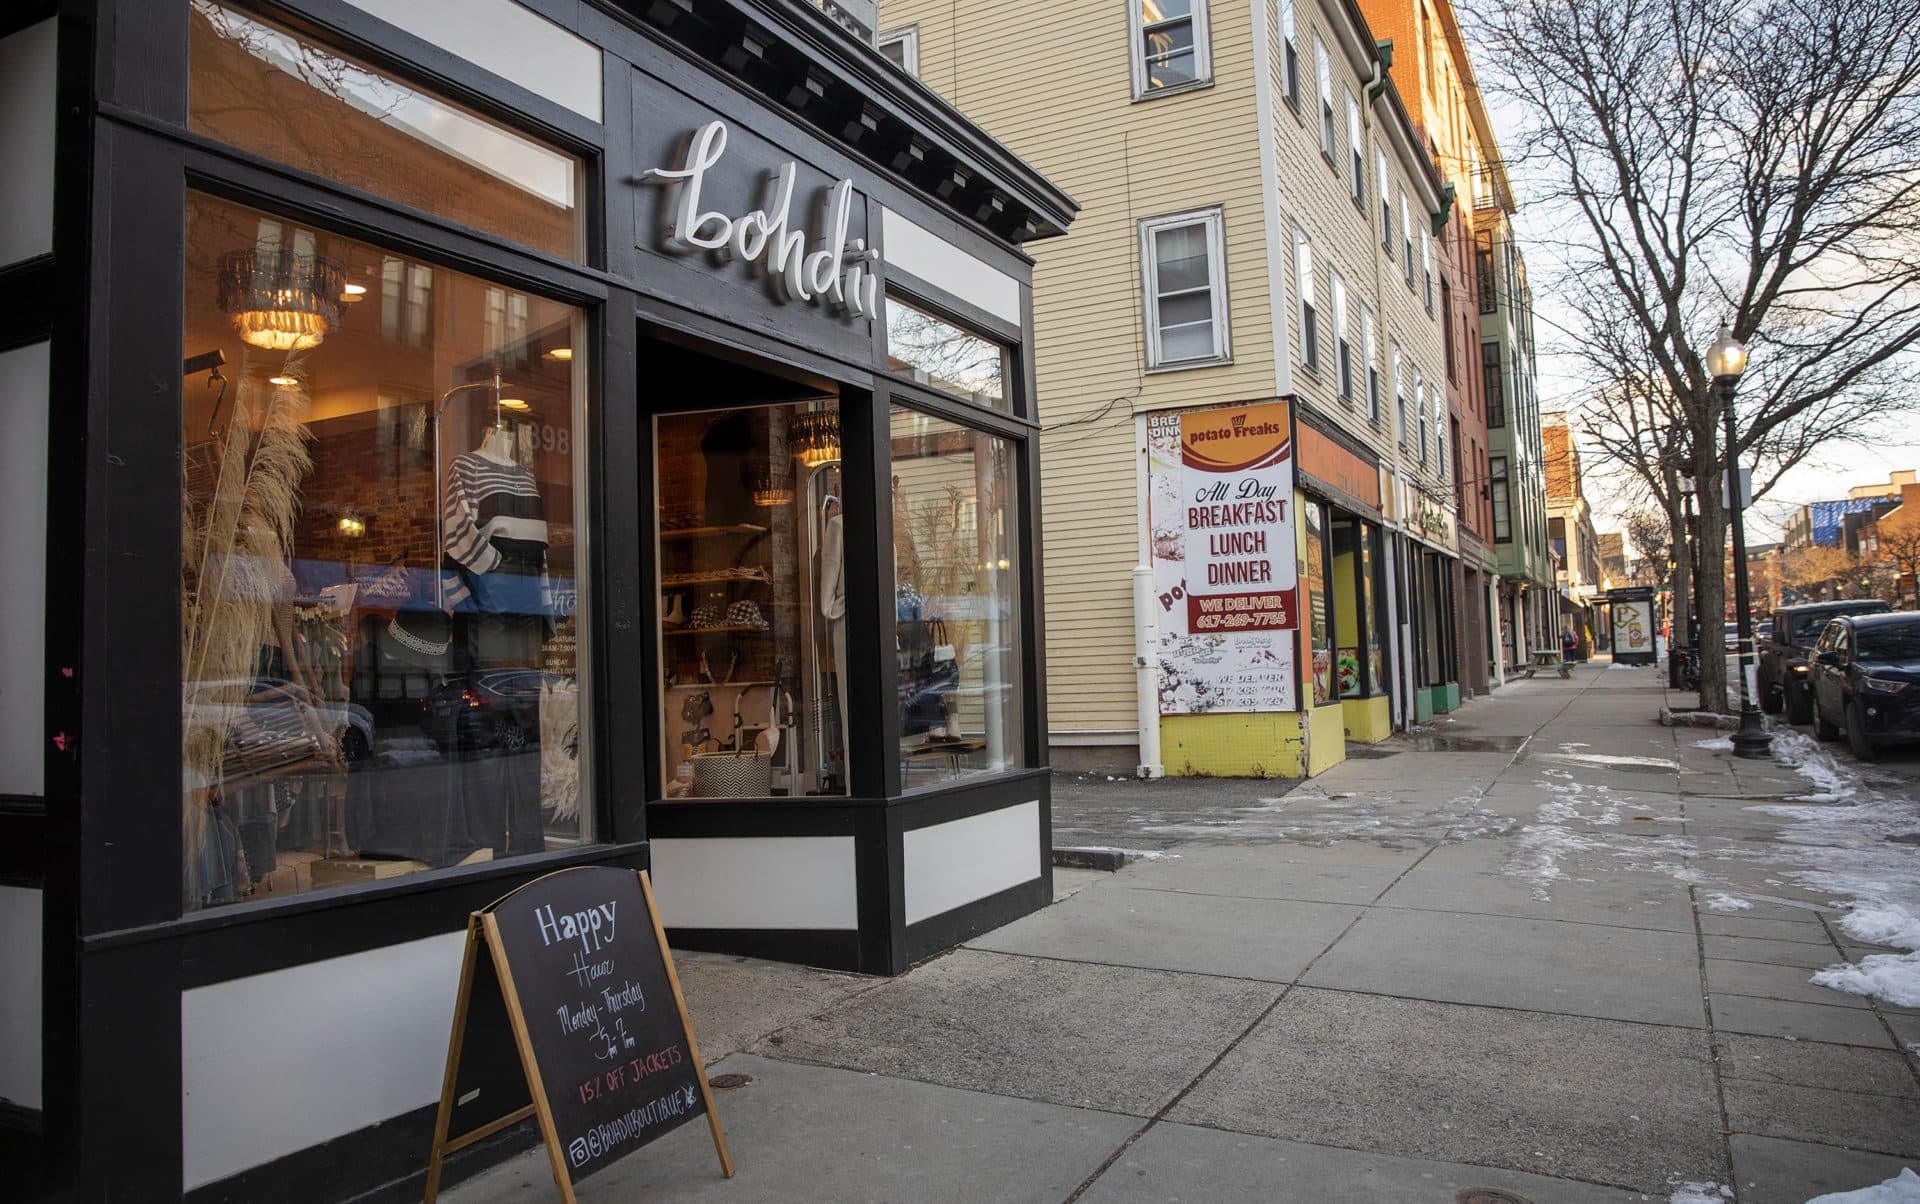 Bohdii is a boutique at 398 West Broadway. The next stores on the street are a closed diner and spa. (Robin Lubbock/WBUR)